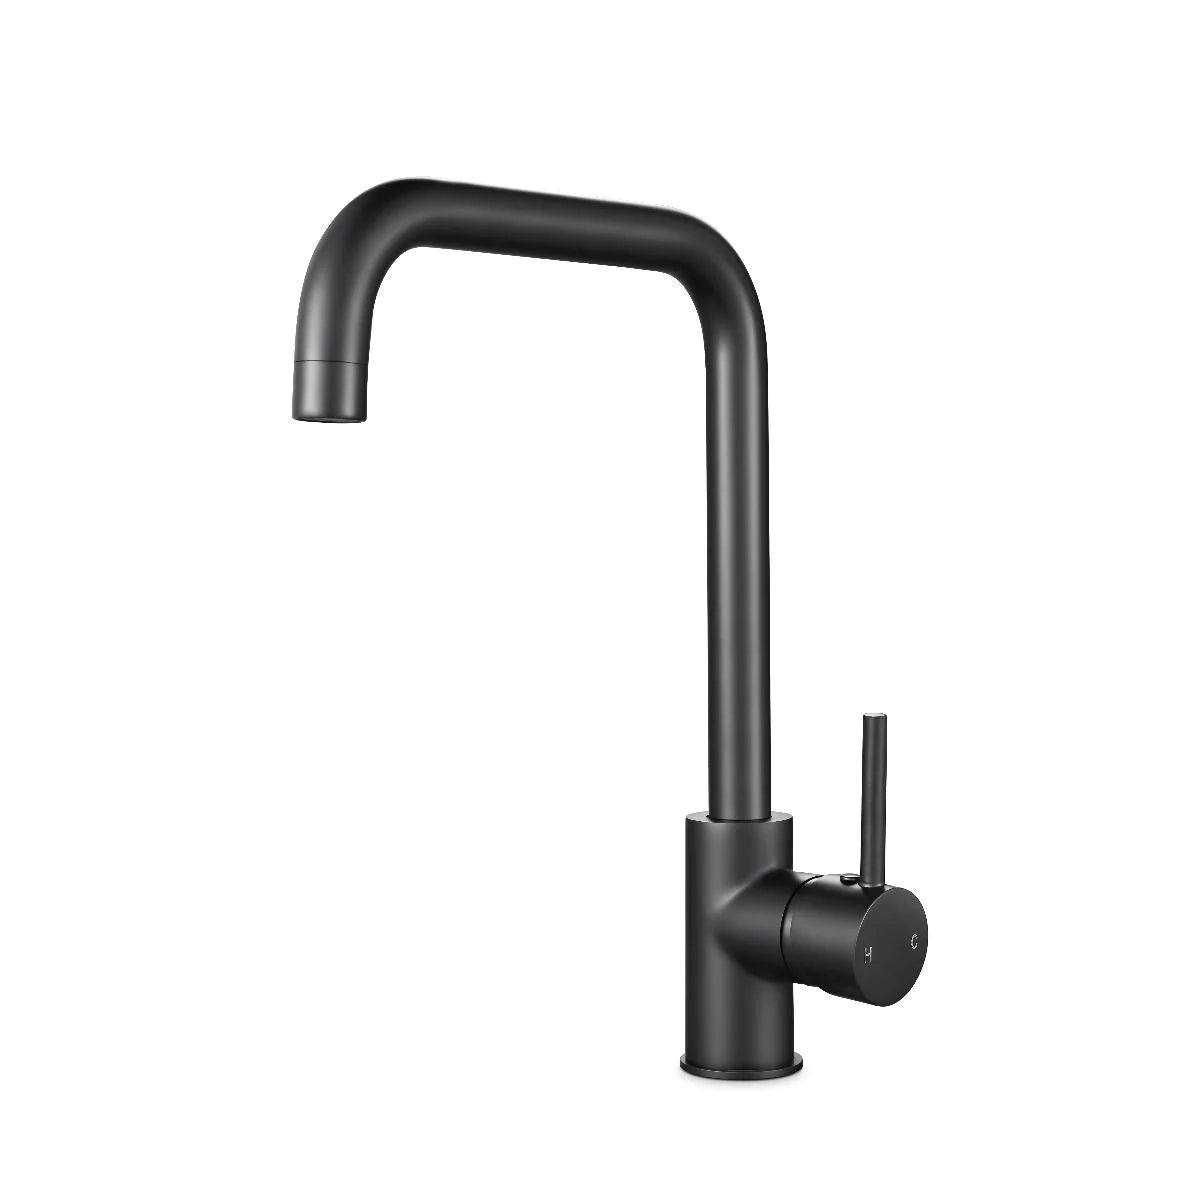 Electroplated Brass Swivel Spout Kitchen Mixer Tap: Stylish and versatile addition to your kitchen-OX1027.KM